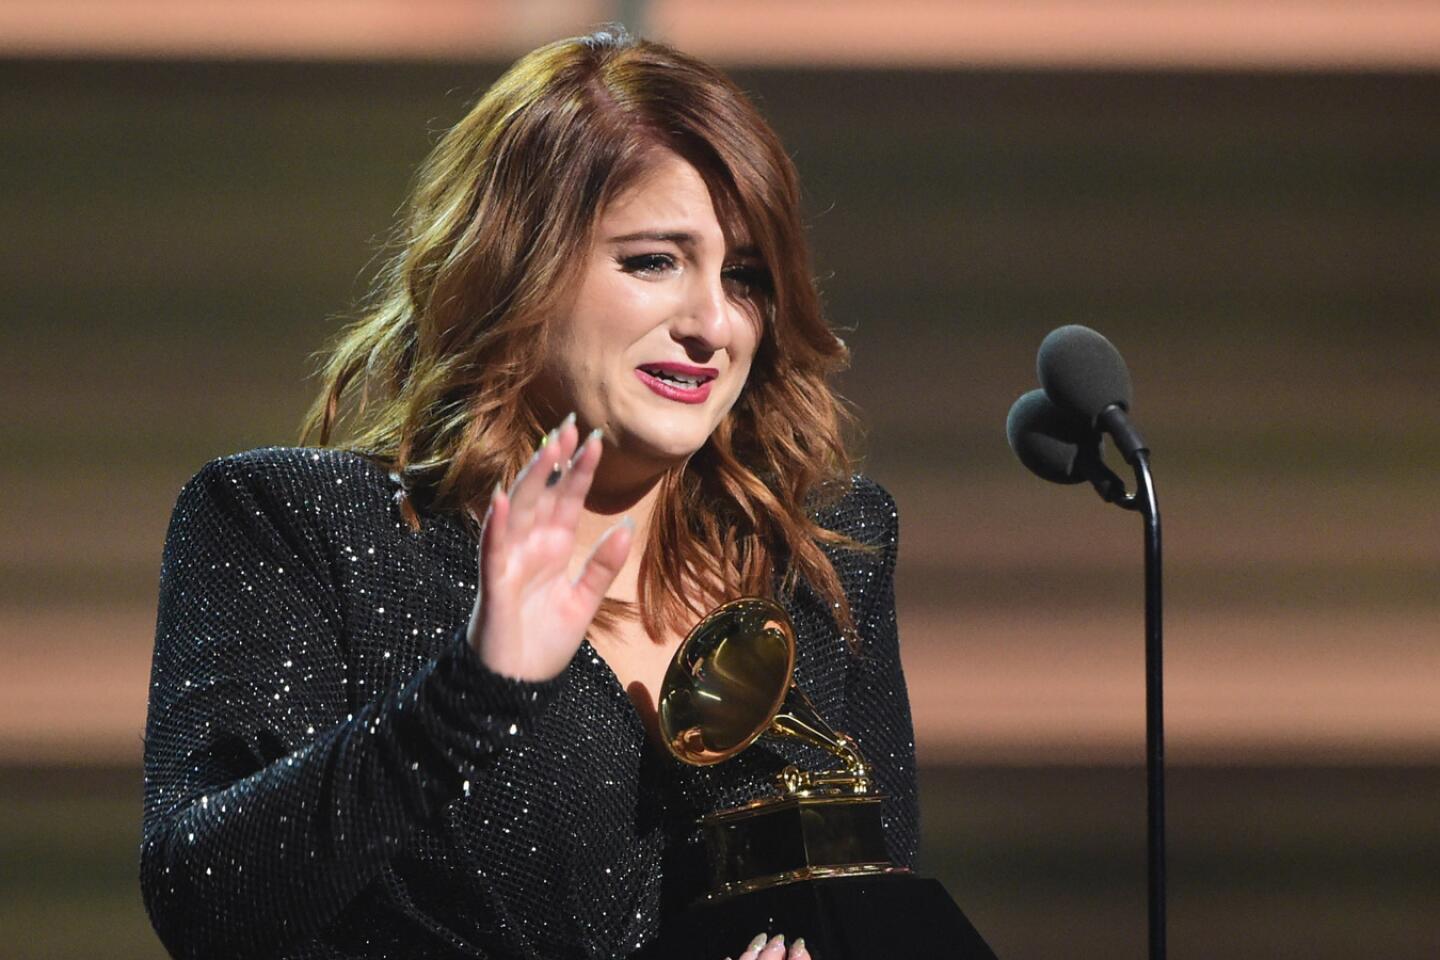 A teary Meghan Trainor recieves the award for best new artist.